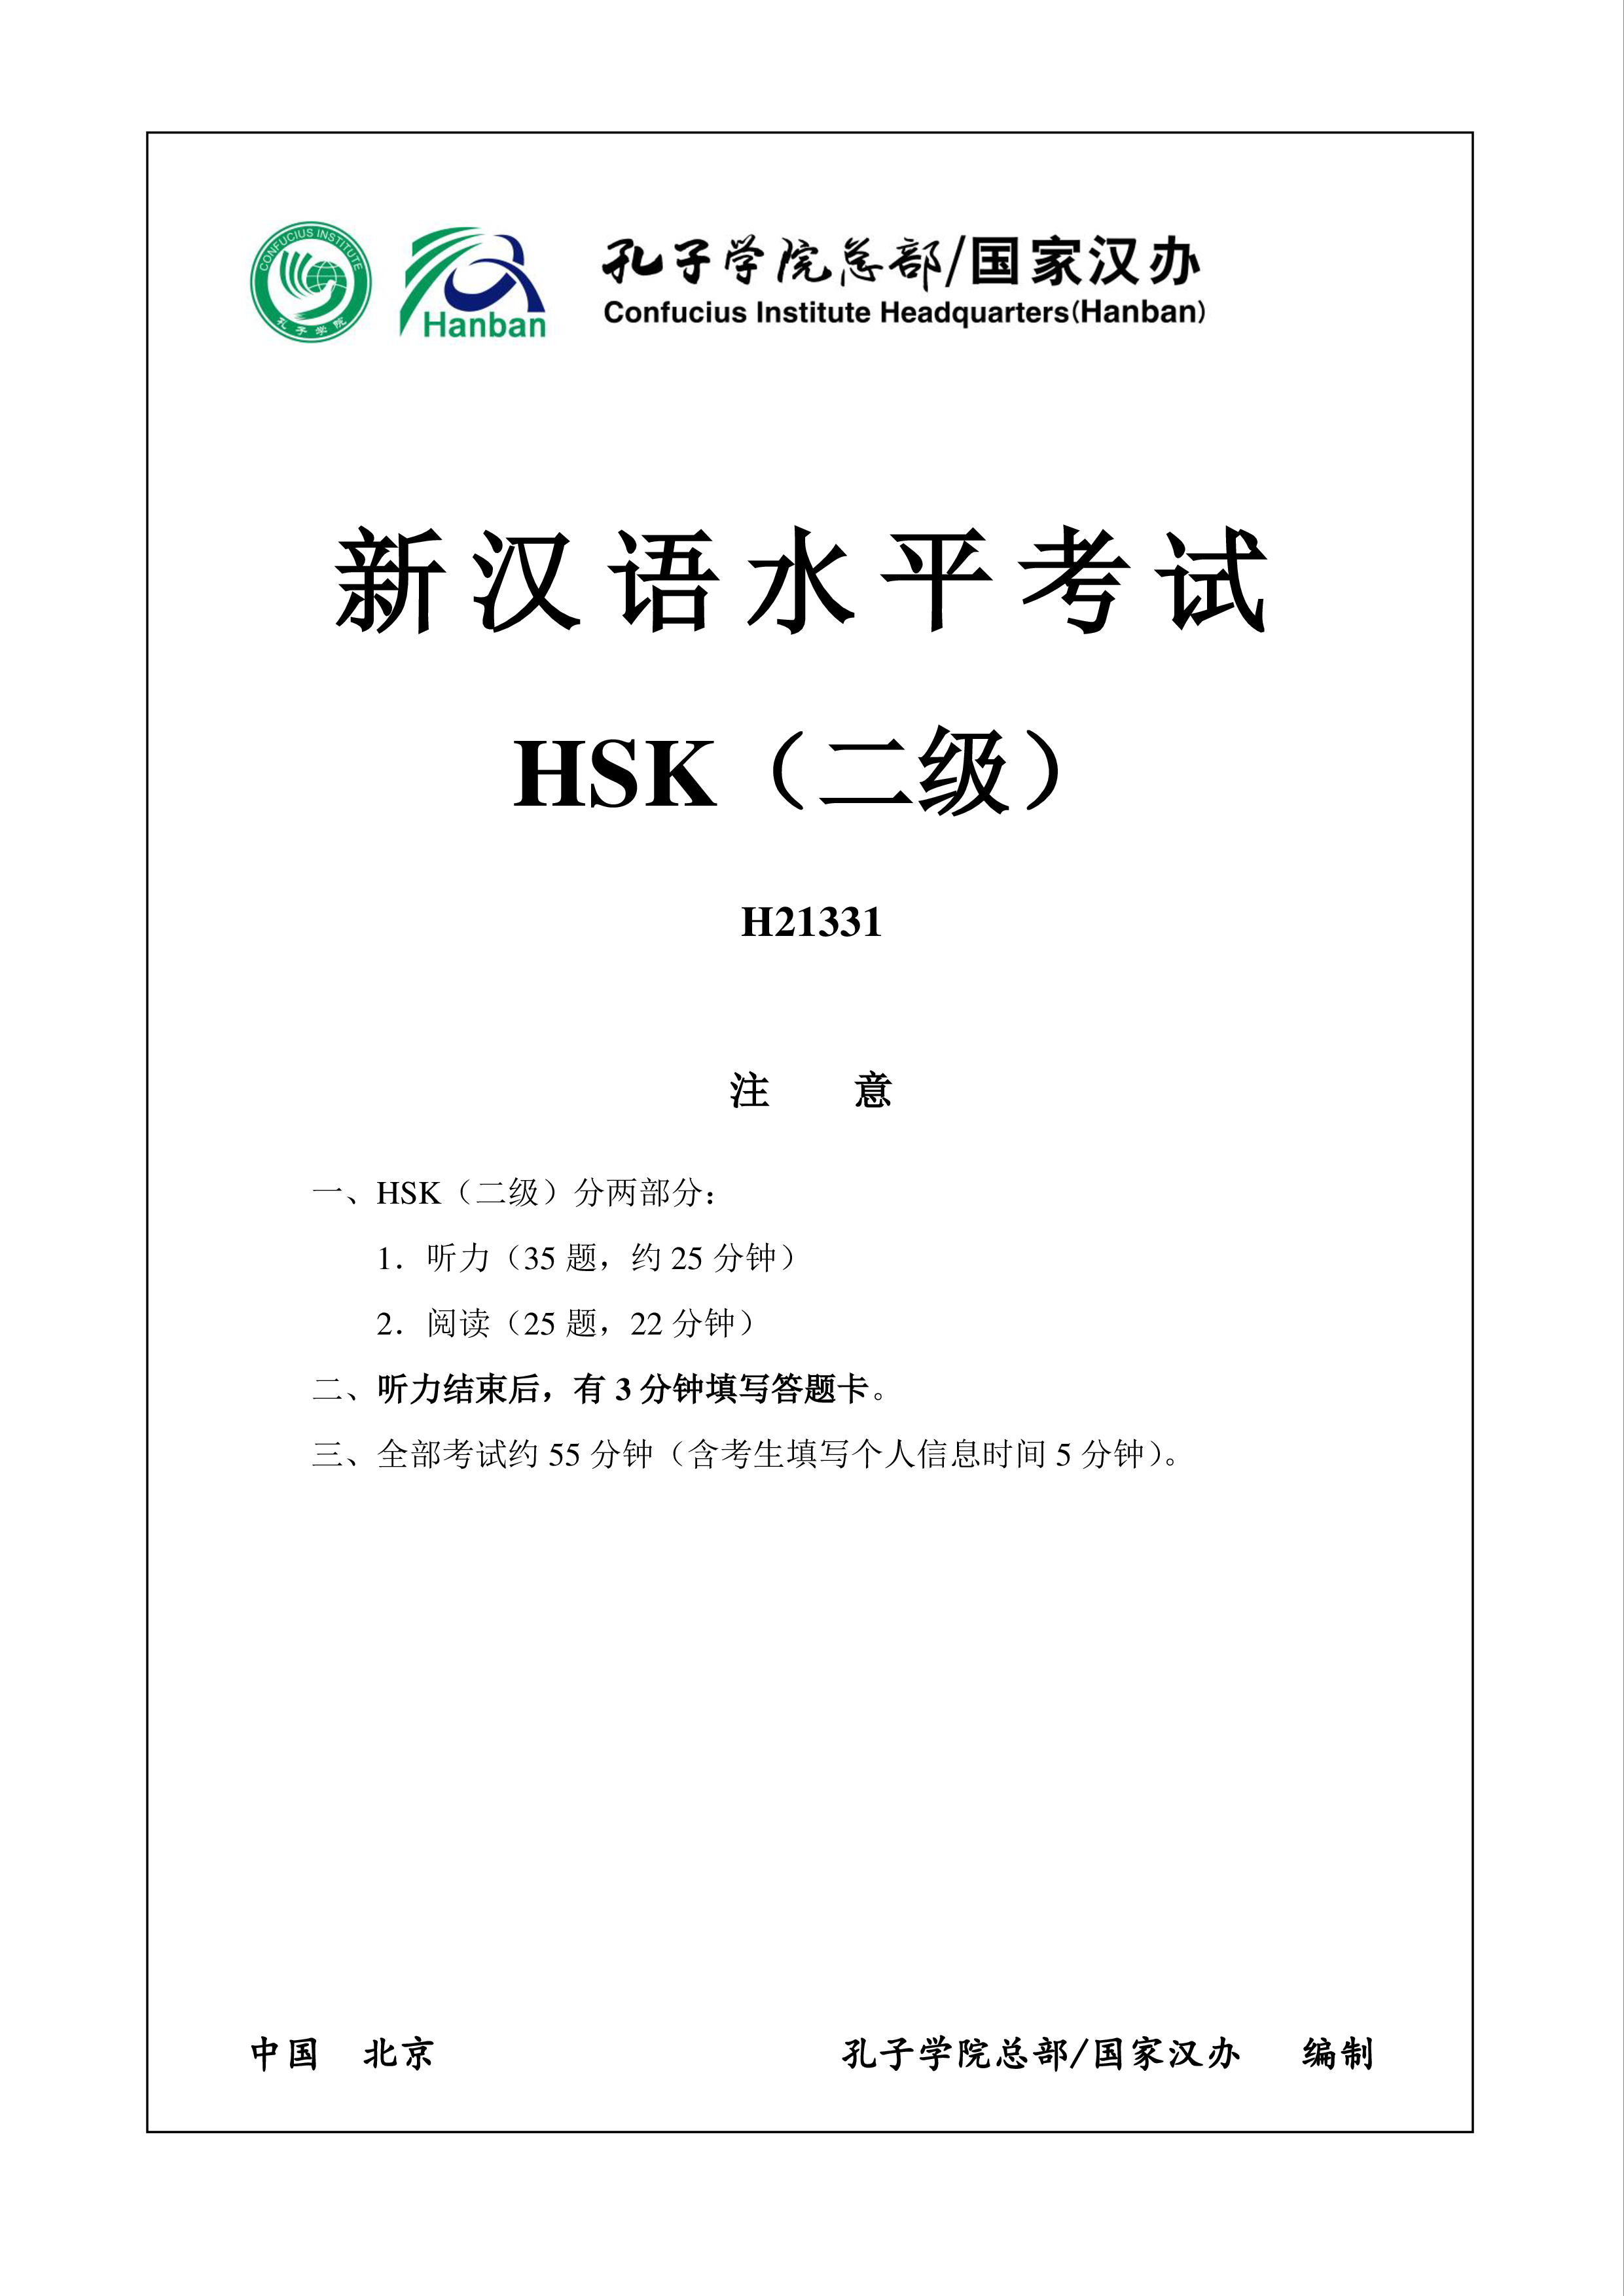 hsk2 chinese exam including answers # hsk2 h21331 modèles